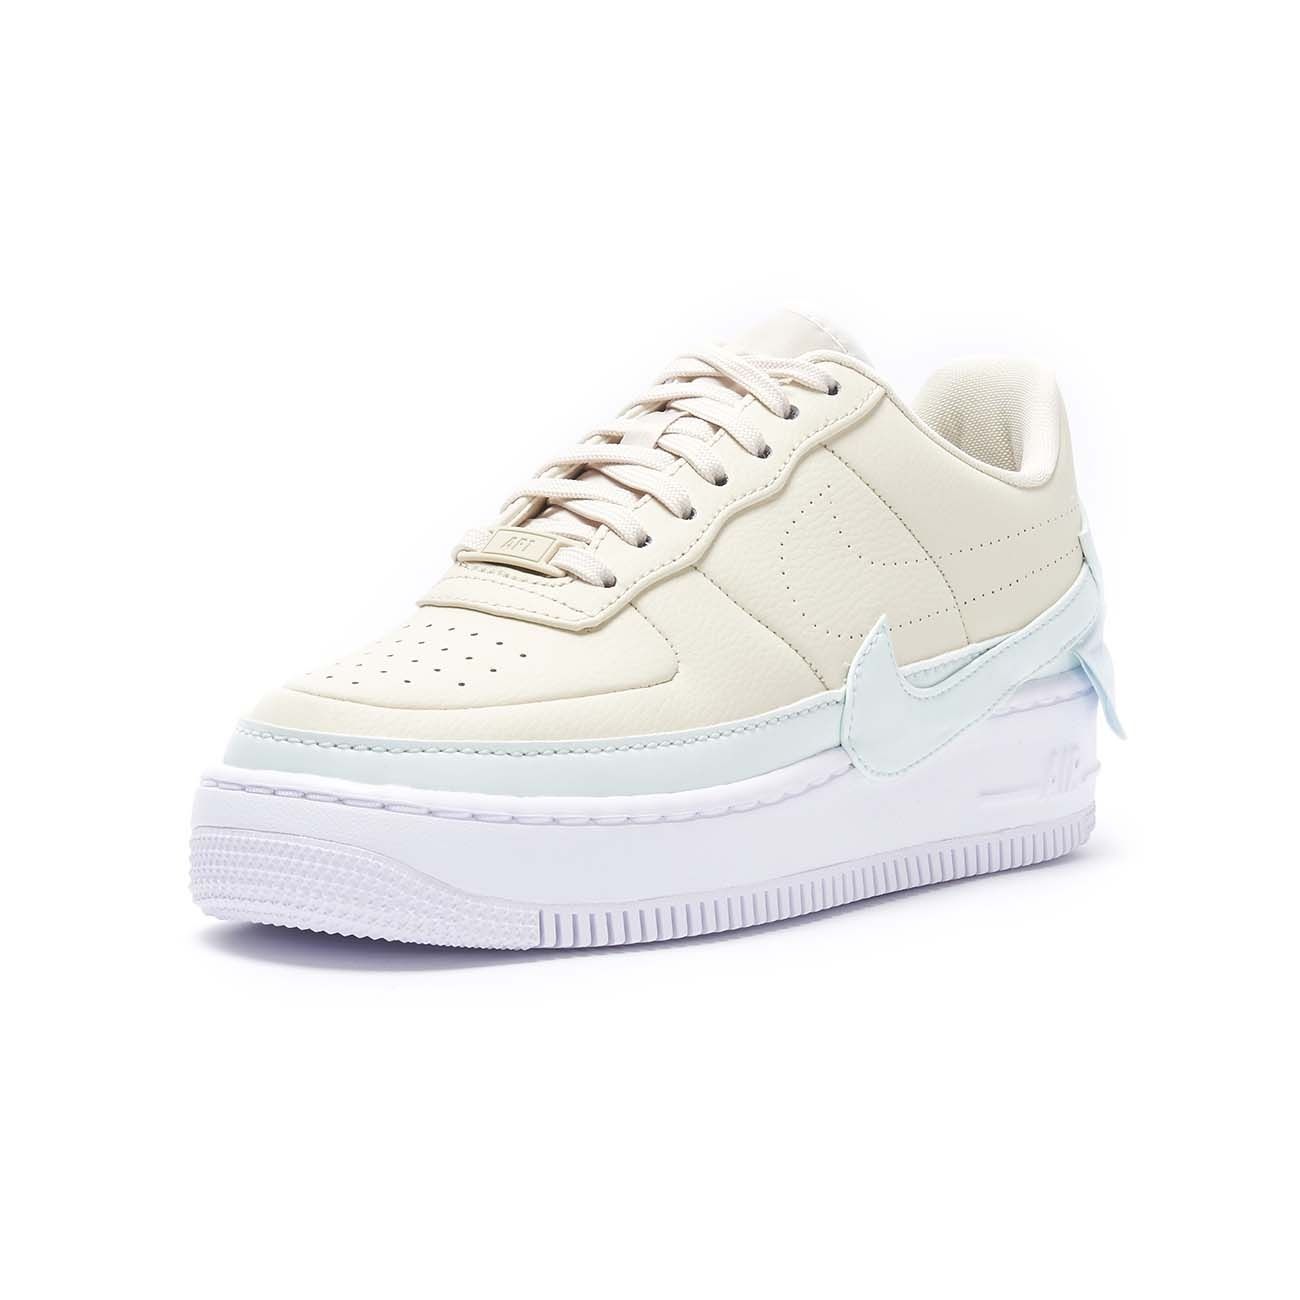 NIKE SNEAKERS AIR FORCE 1 JESTER XX 